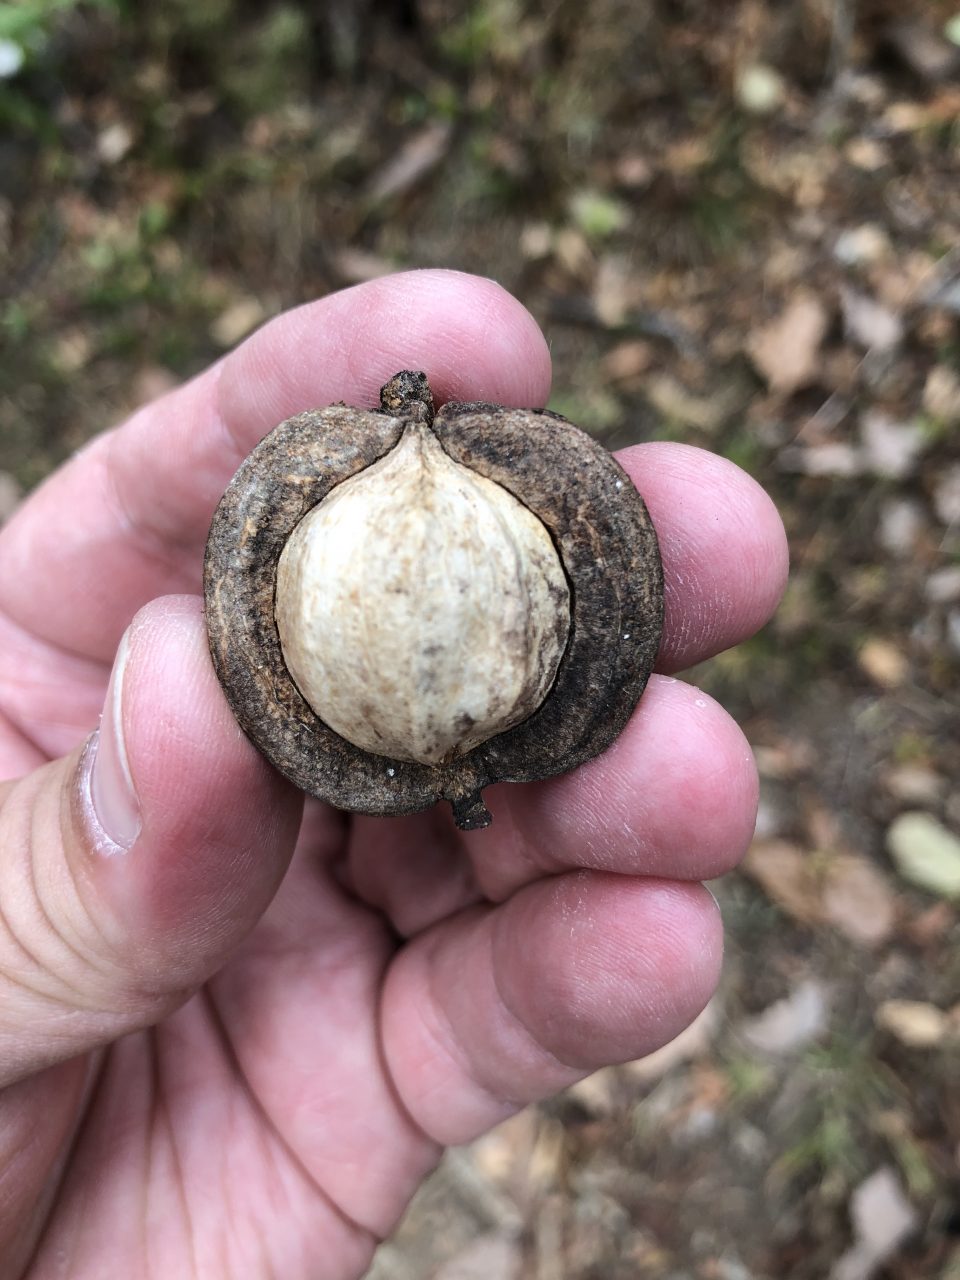 Keith Dotson's hand holding a nut found on the hiking trail